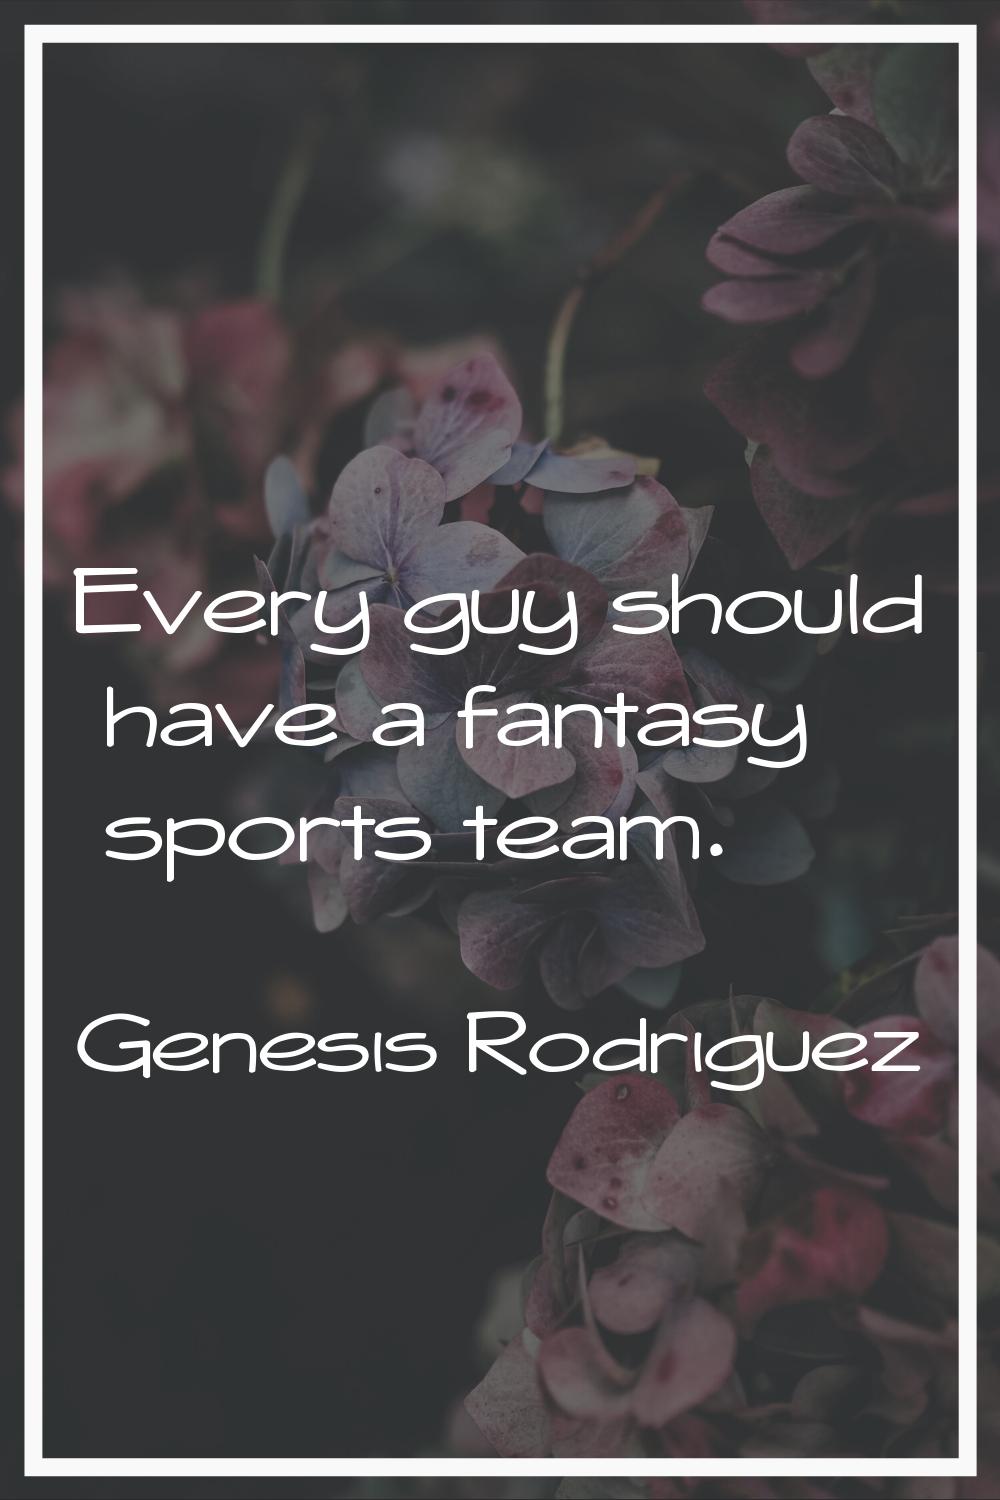 Every guy should have a fantasy sports team.